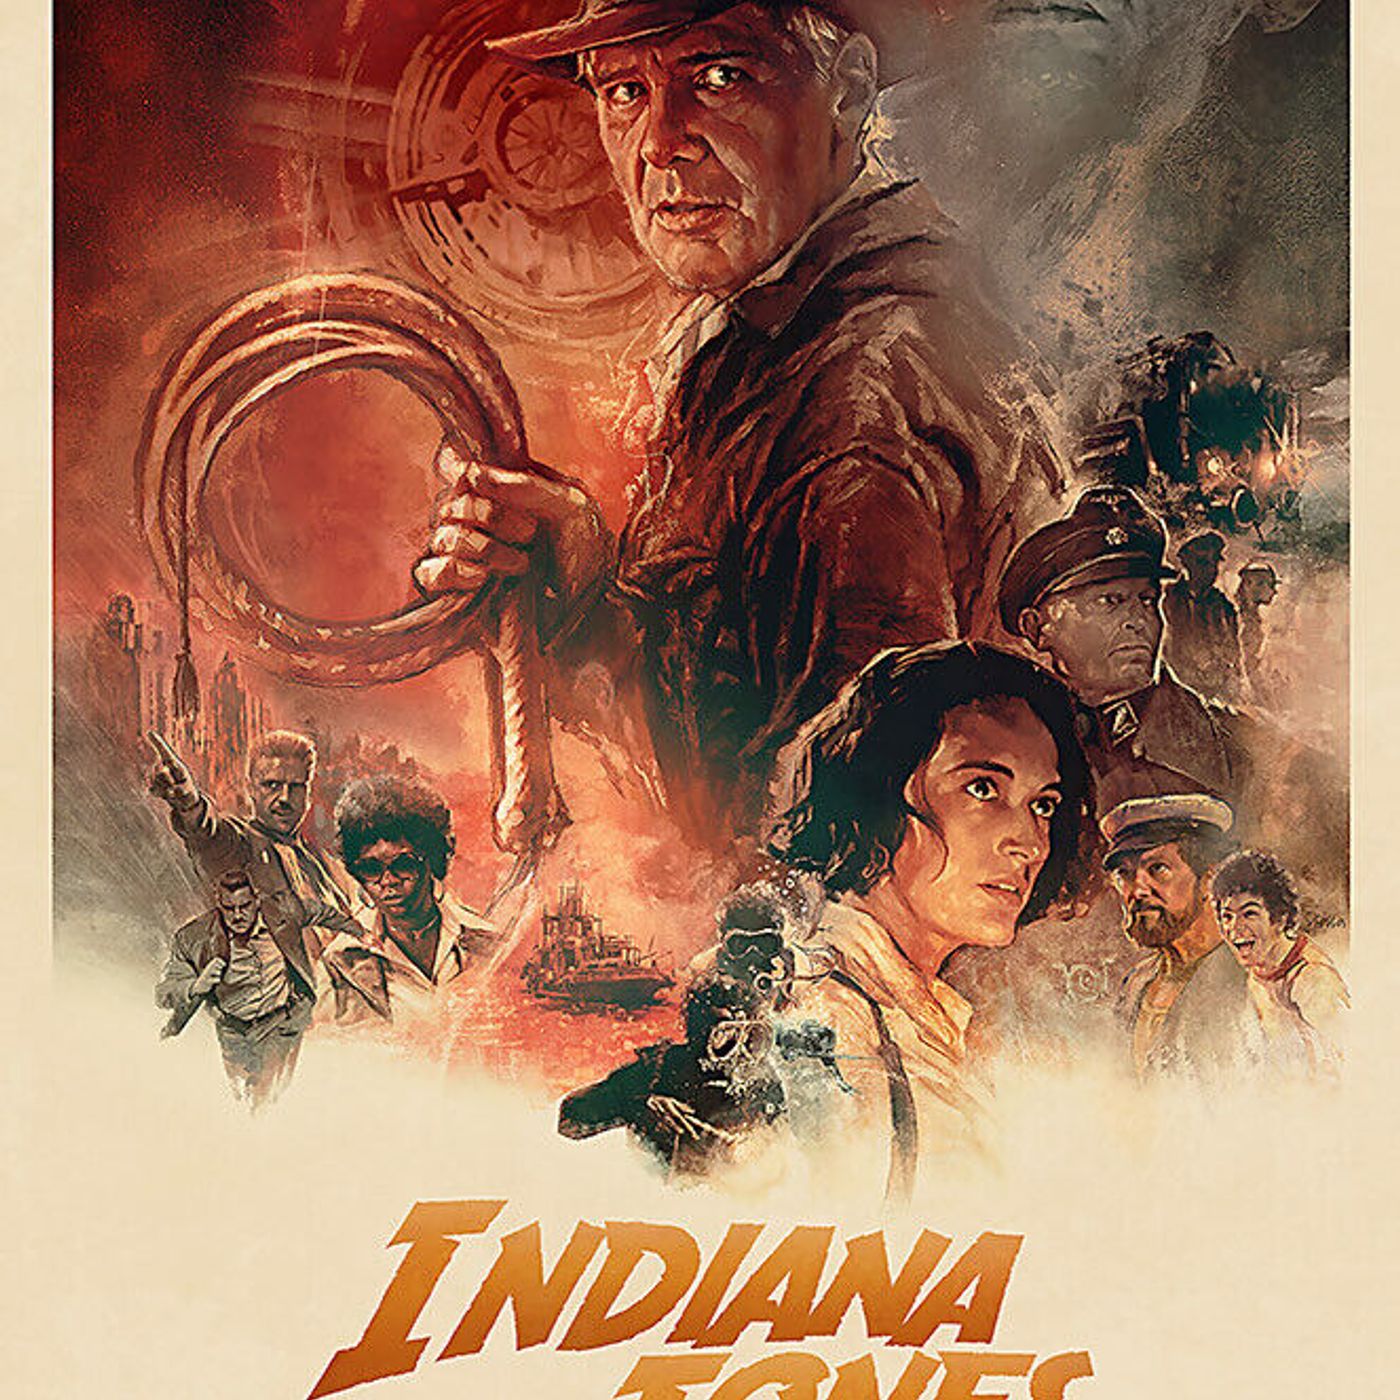 Indiana Jones and the Dial of Destiny: Spoiler review